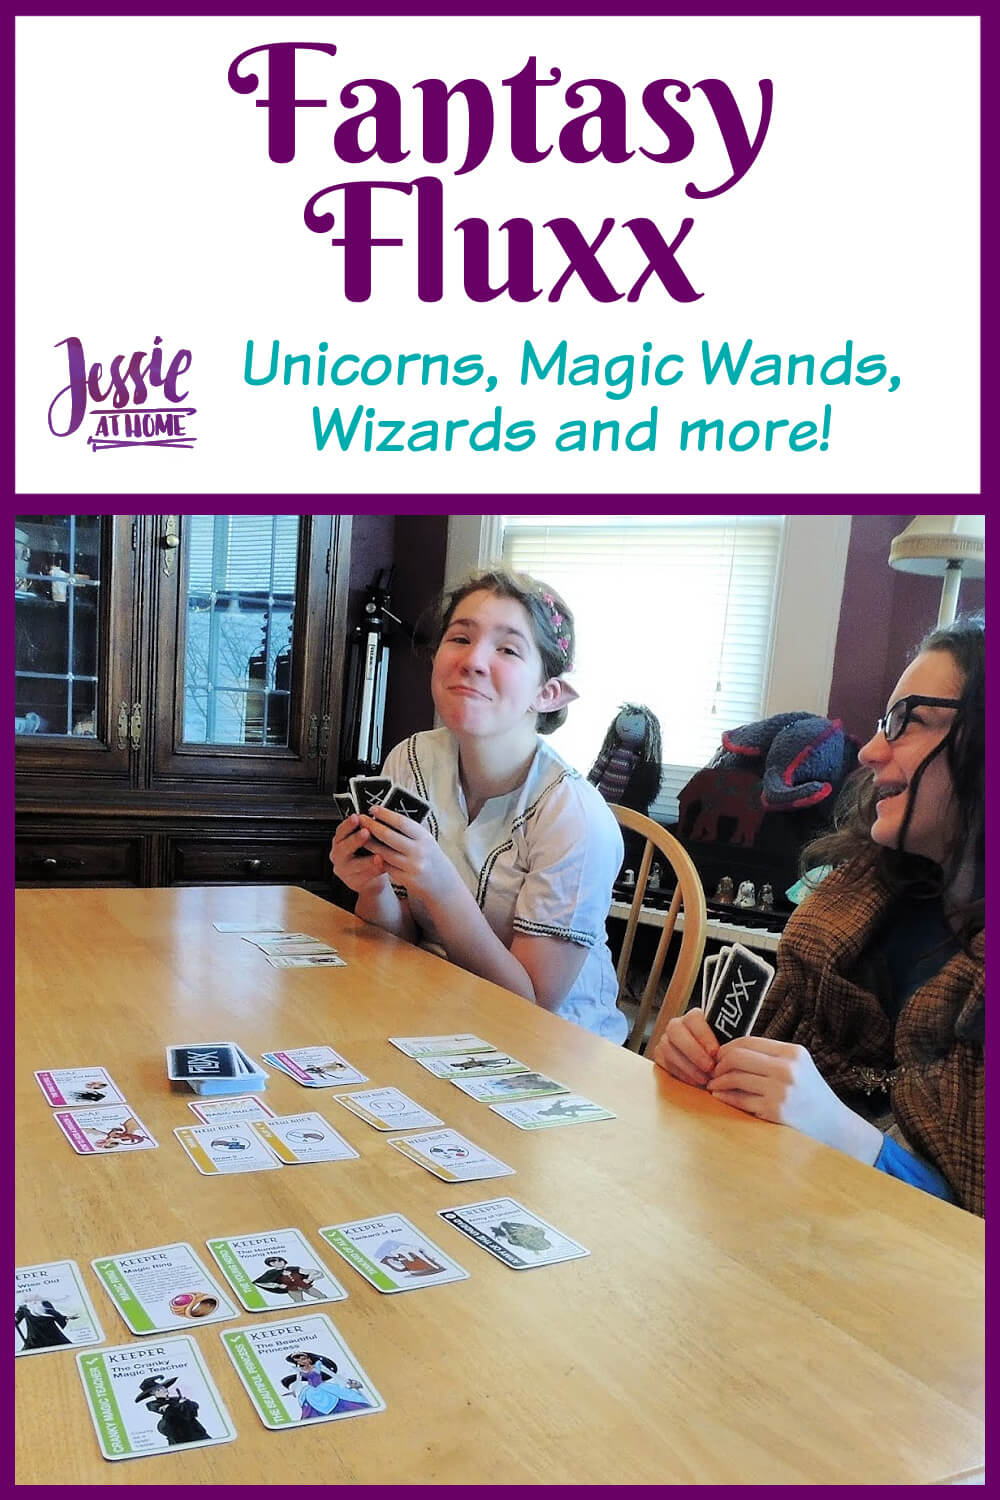 Fantasy Fluxx family game review by Jessie At Home - Pin 1